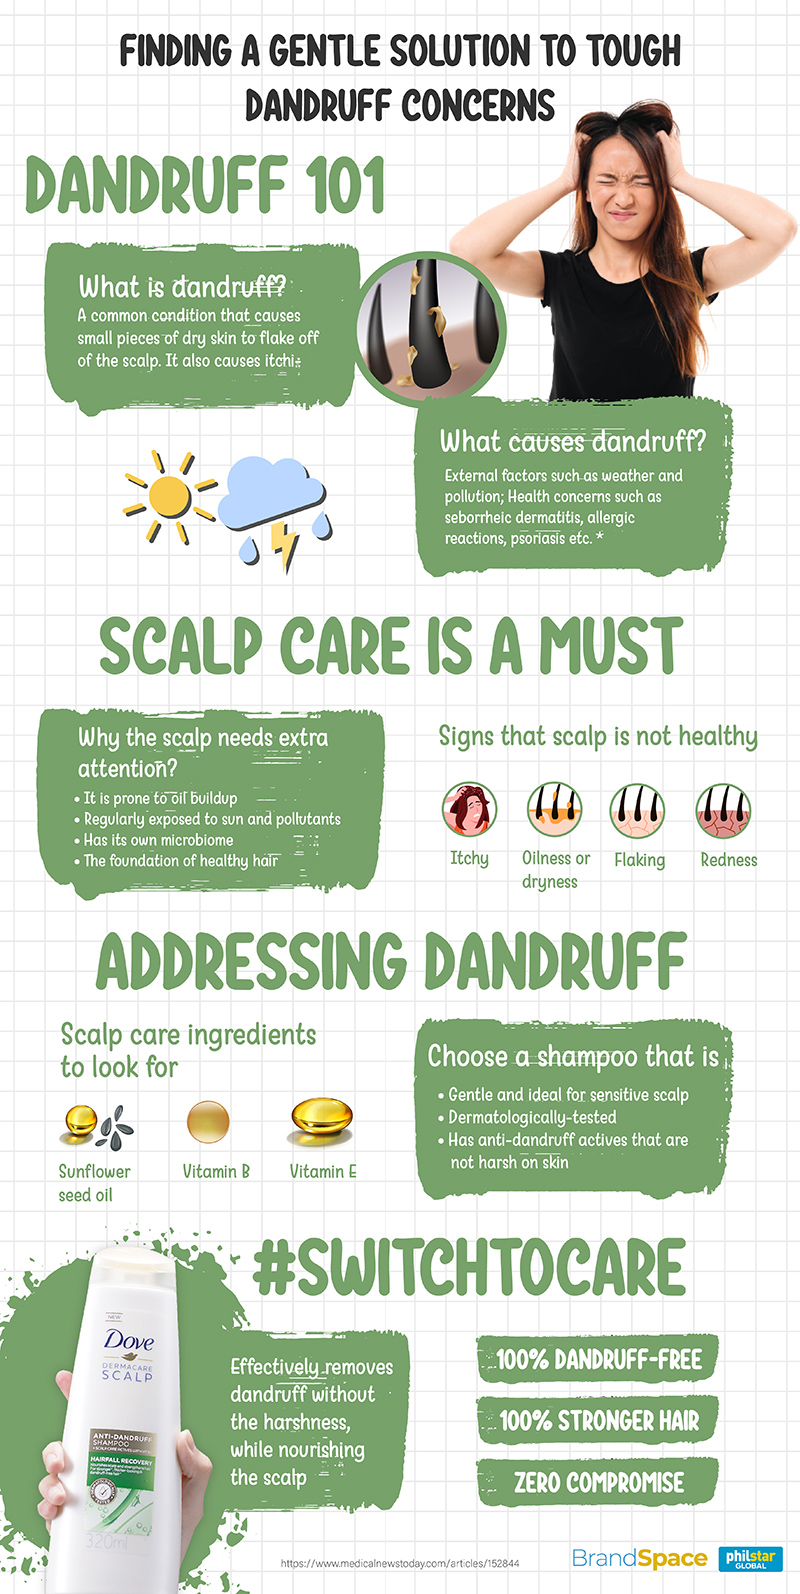 INFOGRAPHIC: Finding a gentle solution to tough dandruff concerns